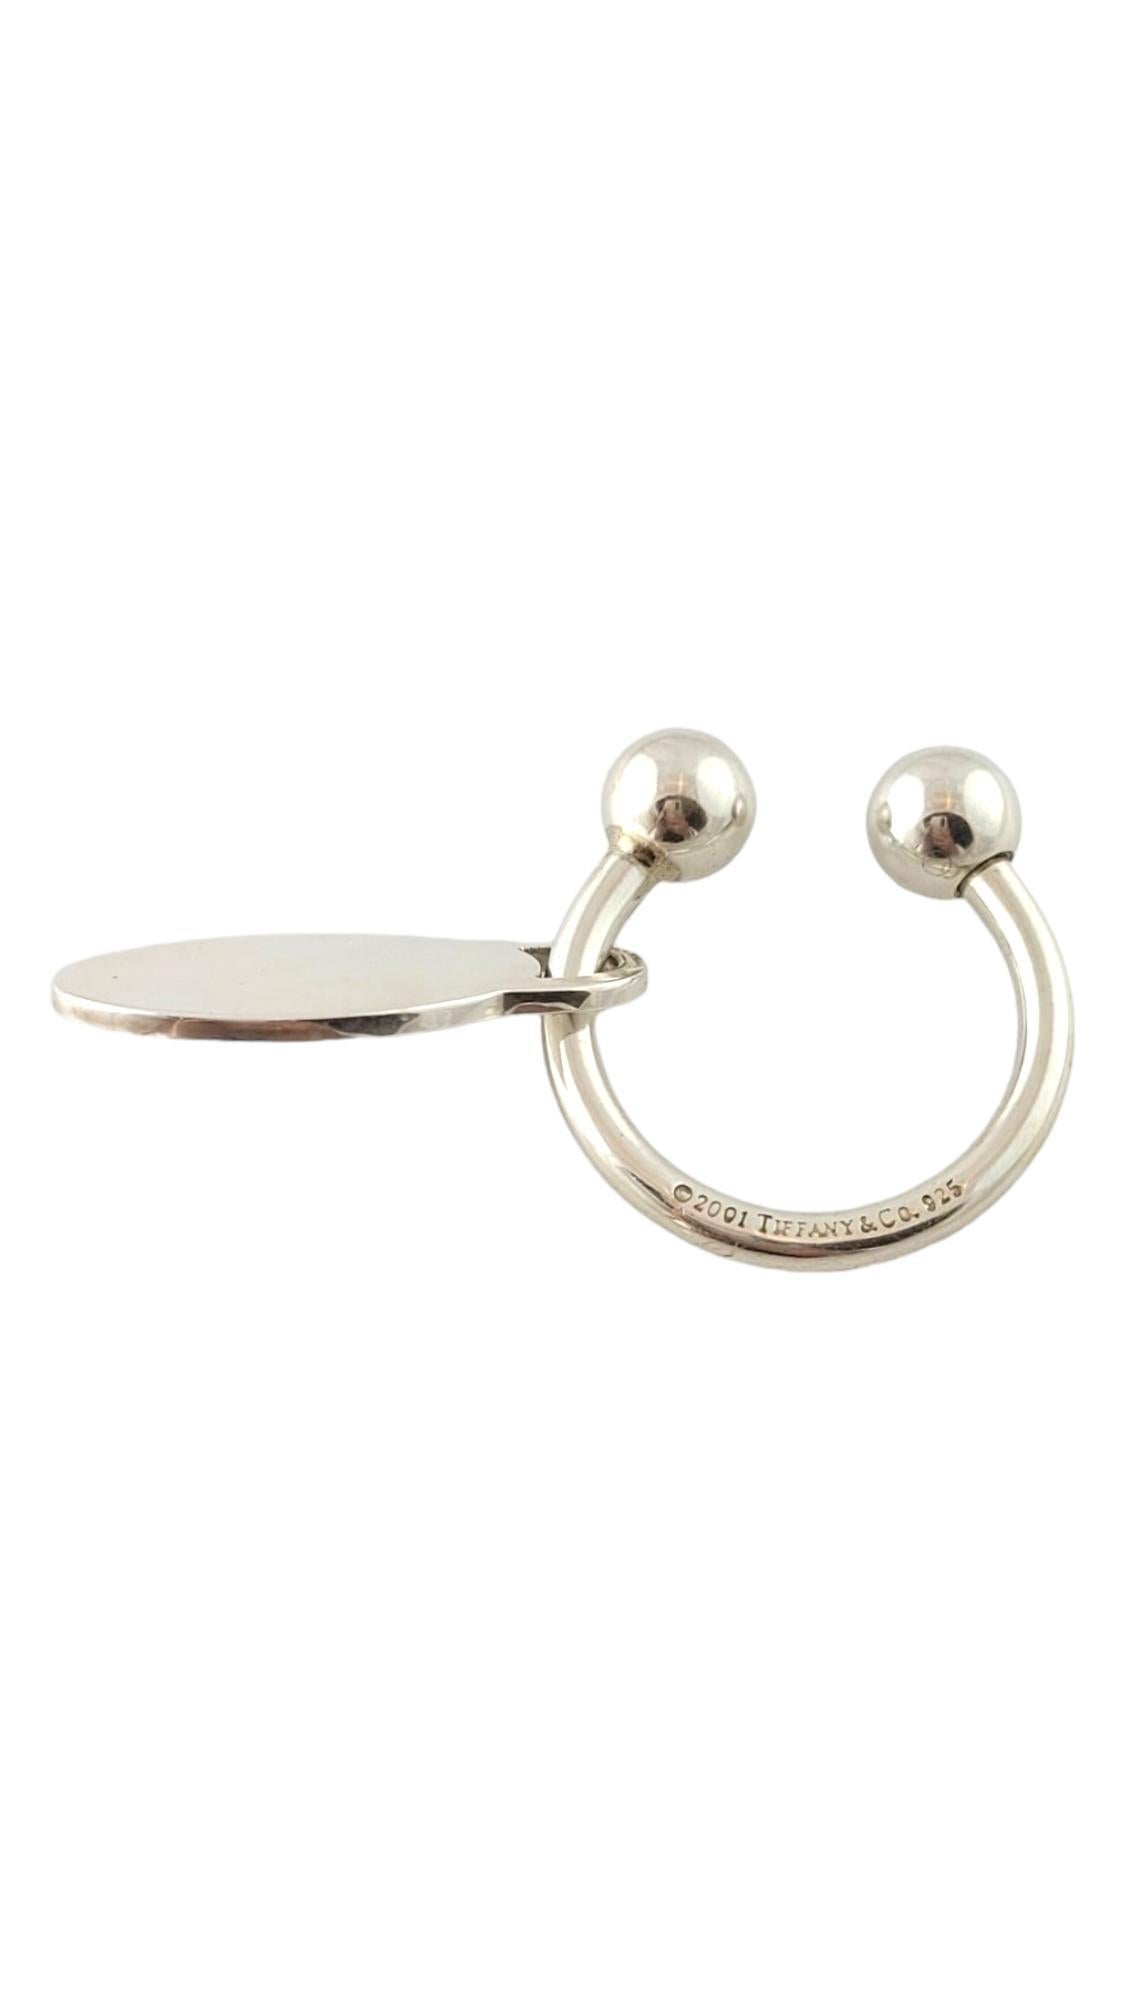 Tiffany & Co Sterling Silver Oval Tag Screwball Key Ring #17412 In Good Condition In Washington Depot, CT